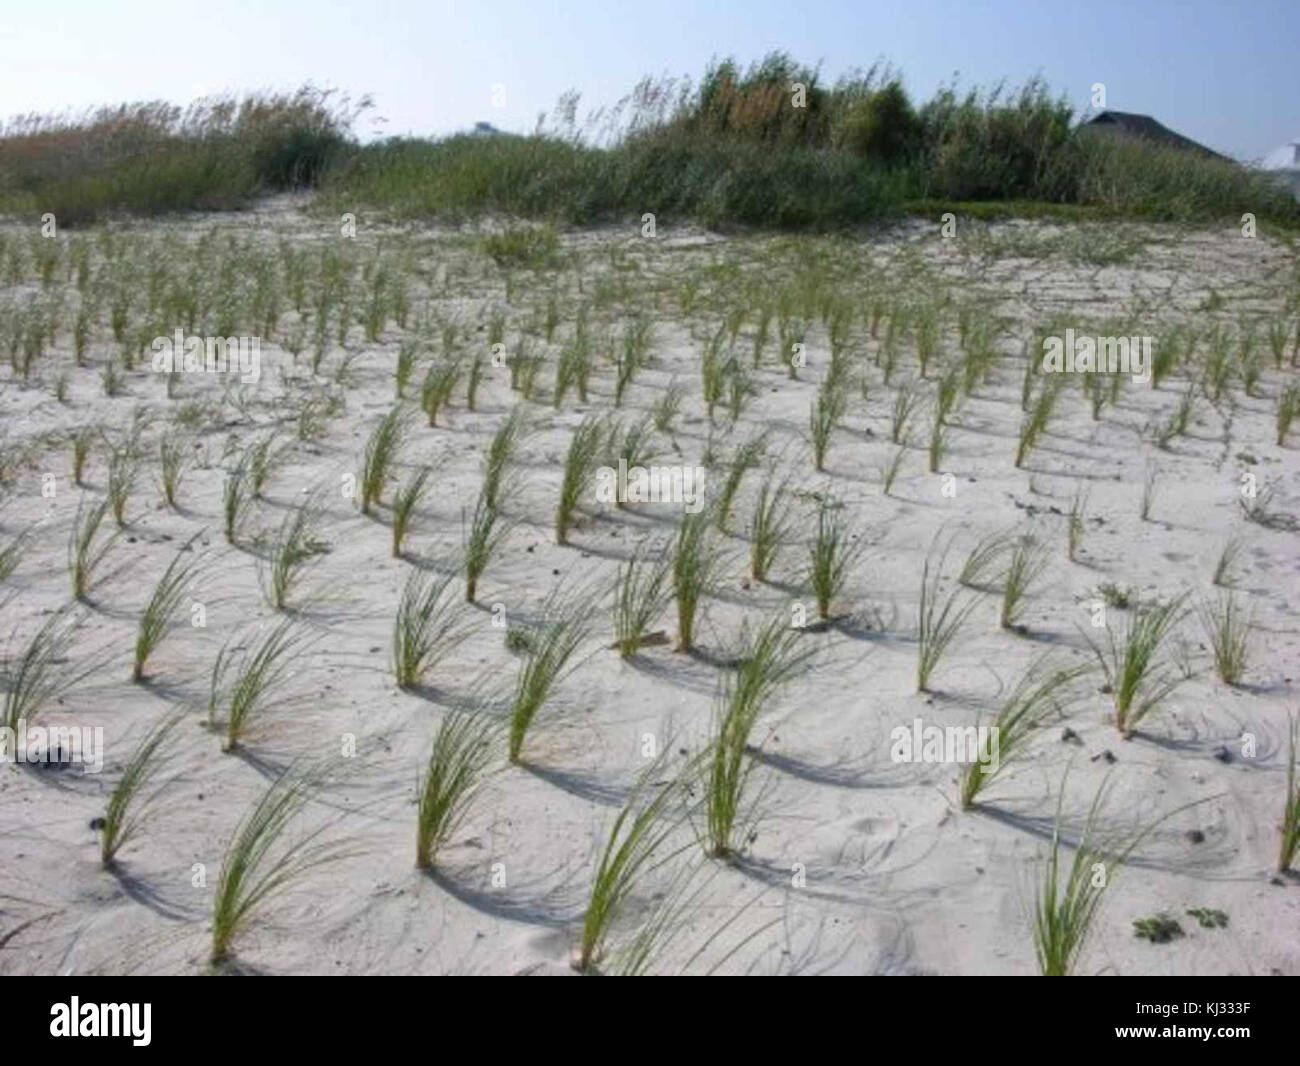 Spartina grass planted in rows to help with beach erosion Stock Photo